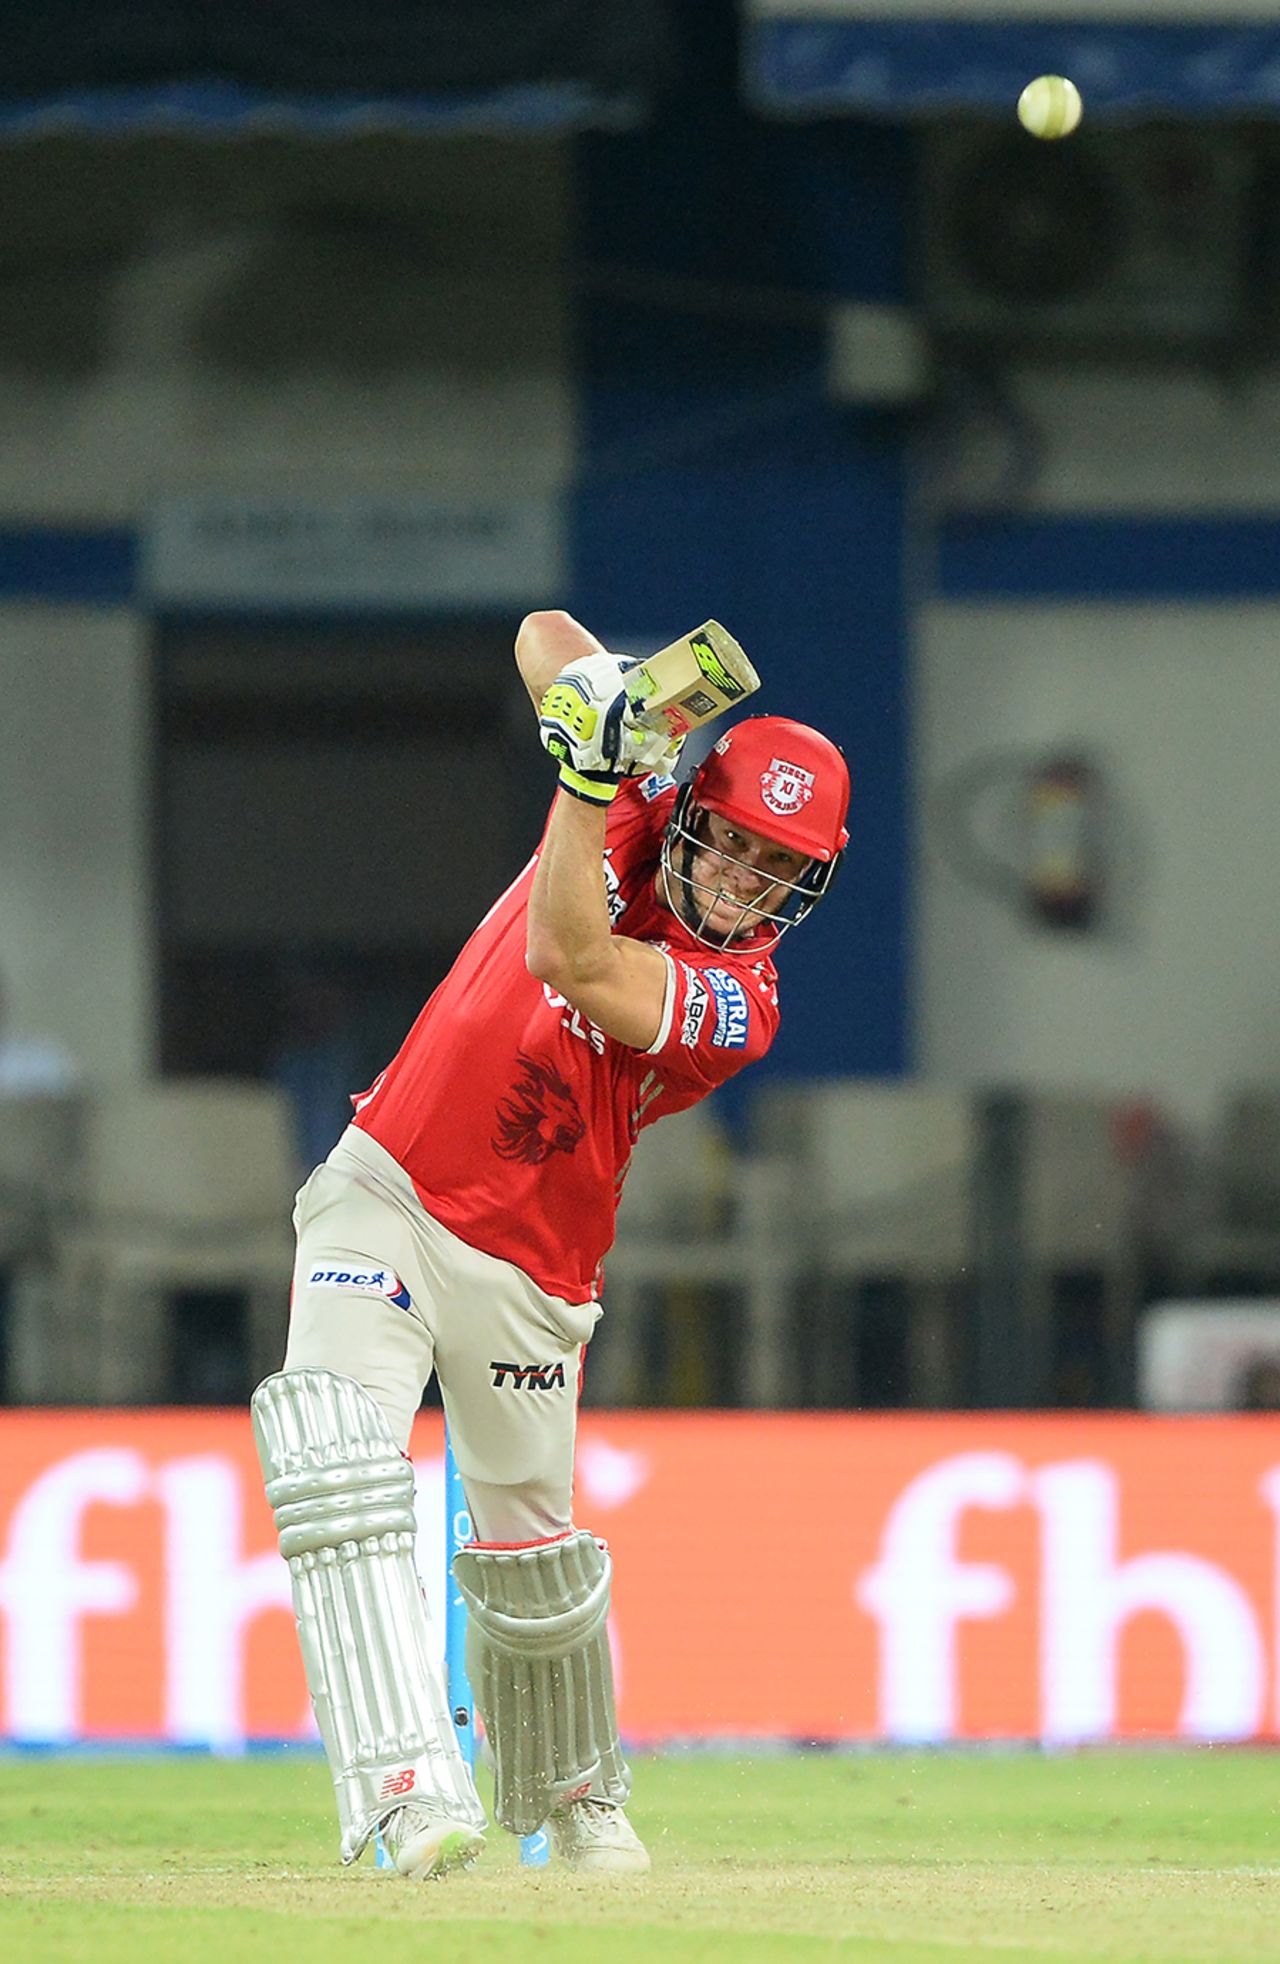 David Miller punches one down the ground, Kings XI Punjab v Rising Pune Supergiant, IPL 2017, Indore, April 8, 2017